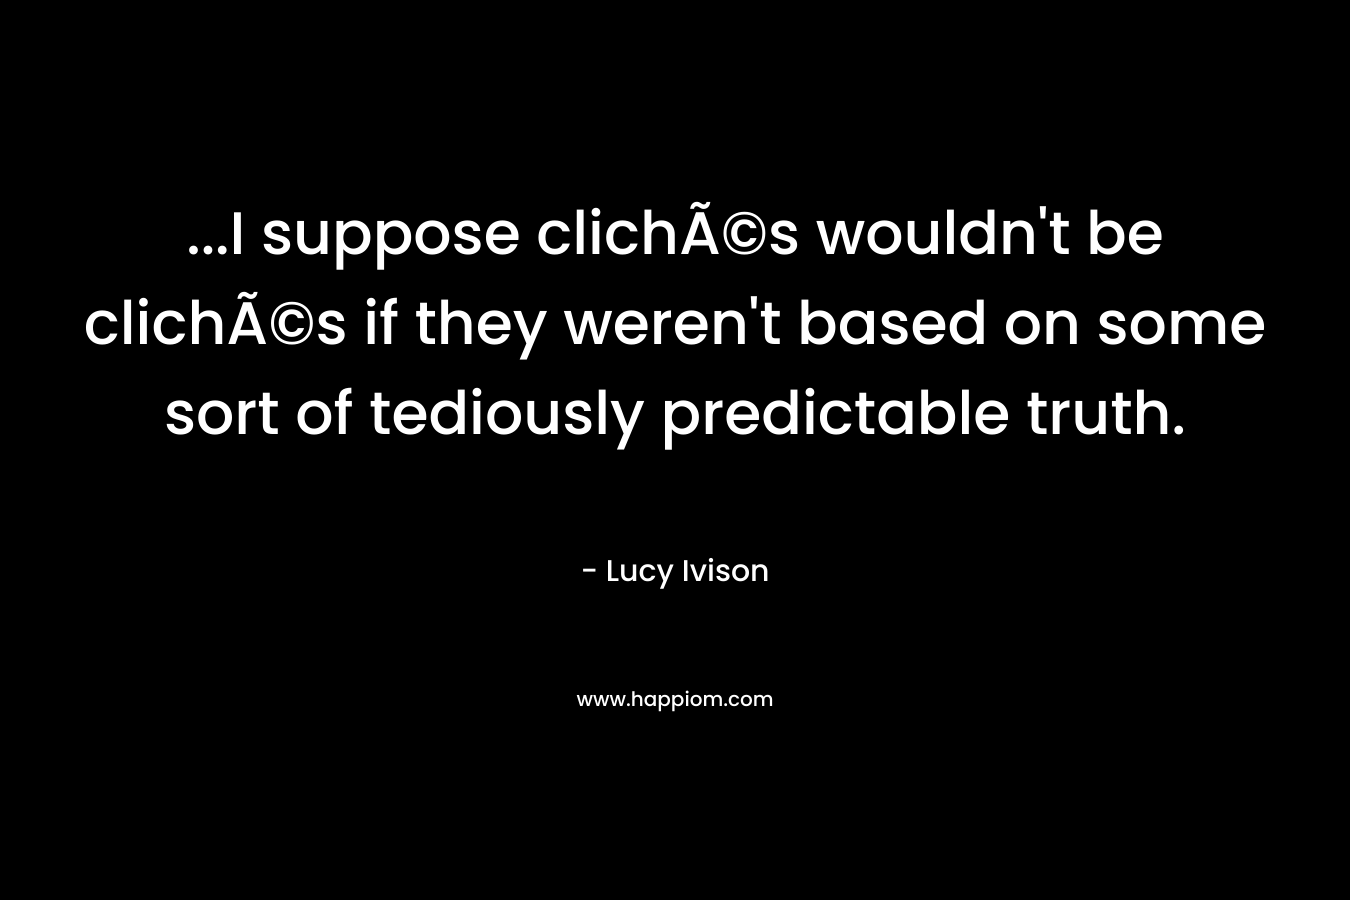 …I suppose clichÃ©s wouldn’t be clichÃ©s if they weren’t based on some sort of tediously predictable truth. – Lucy Ivison